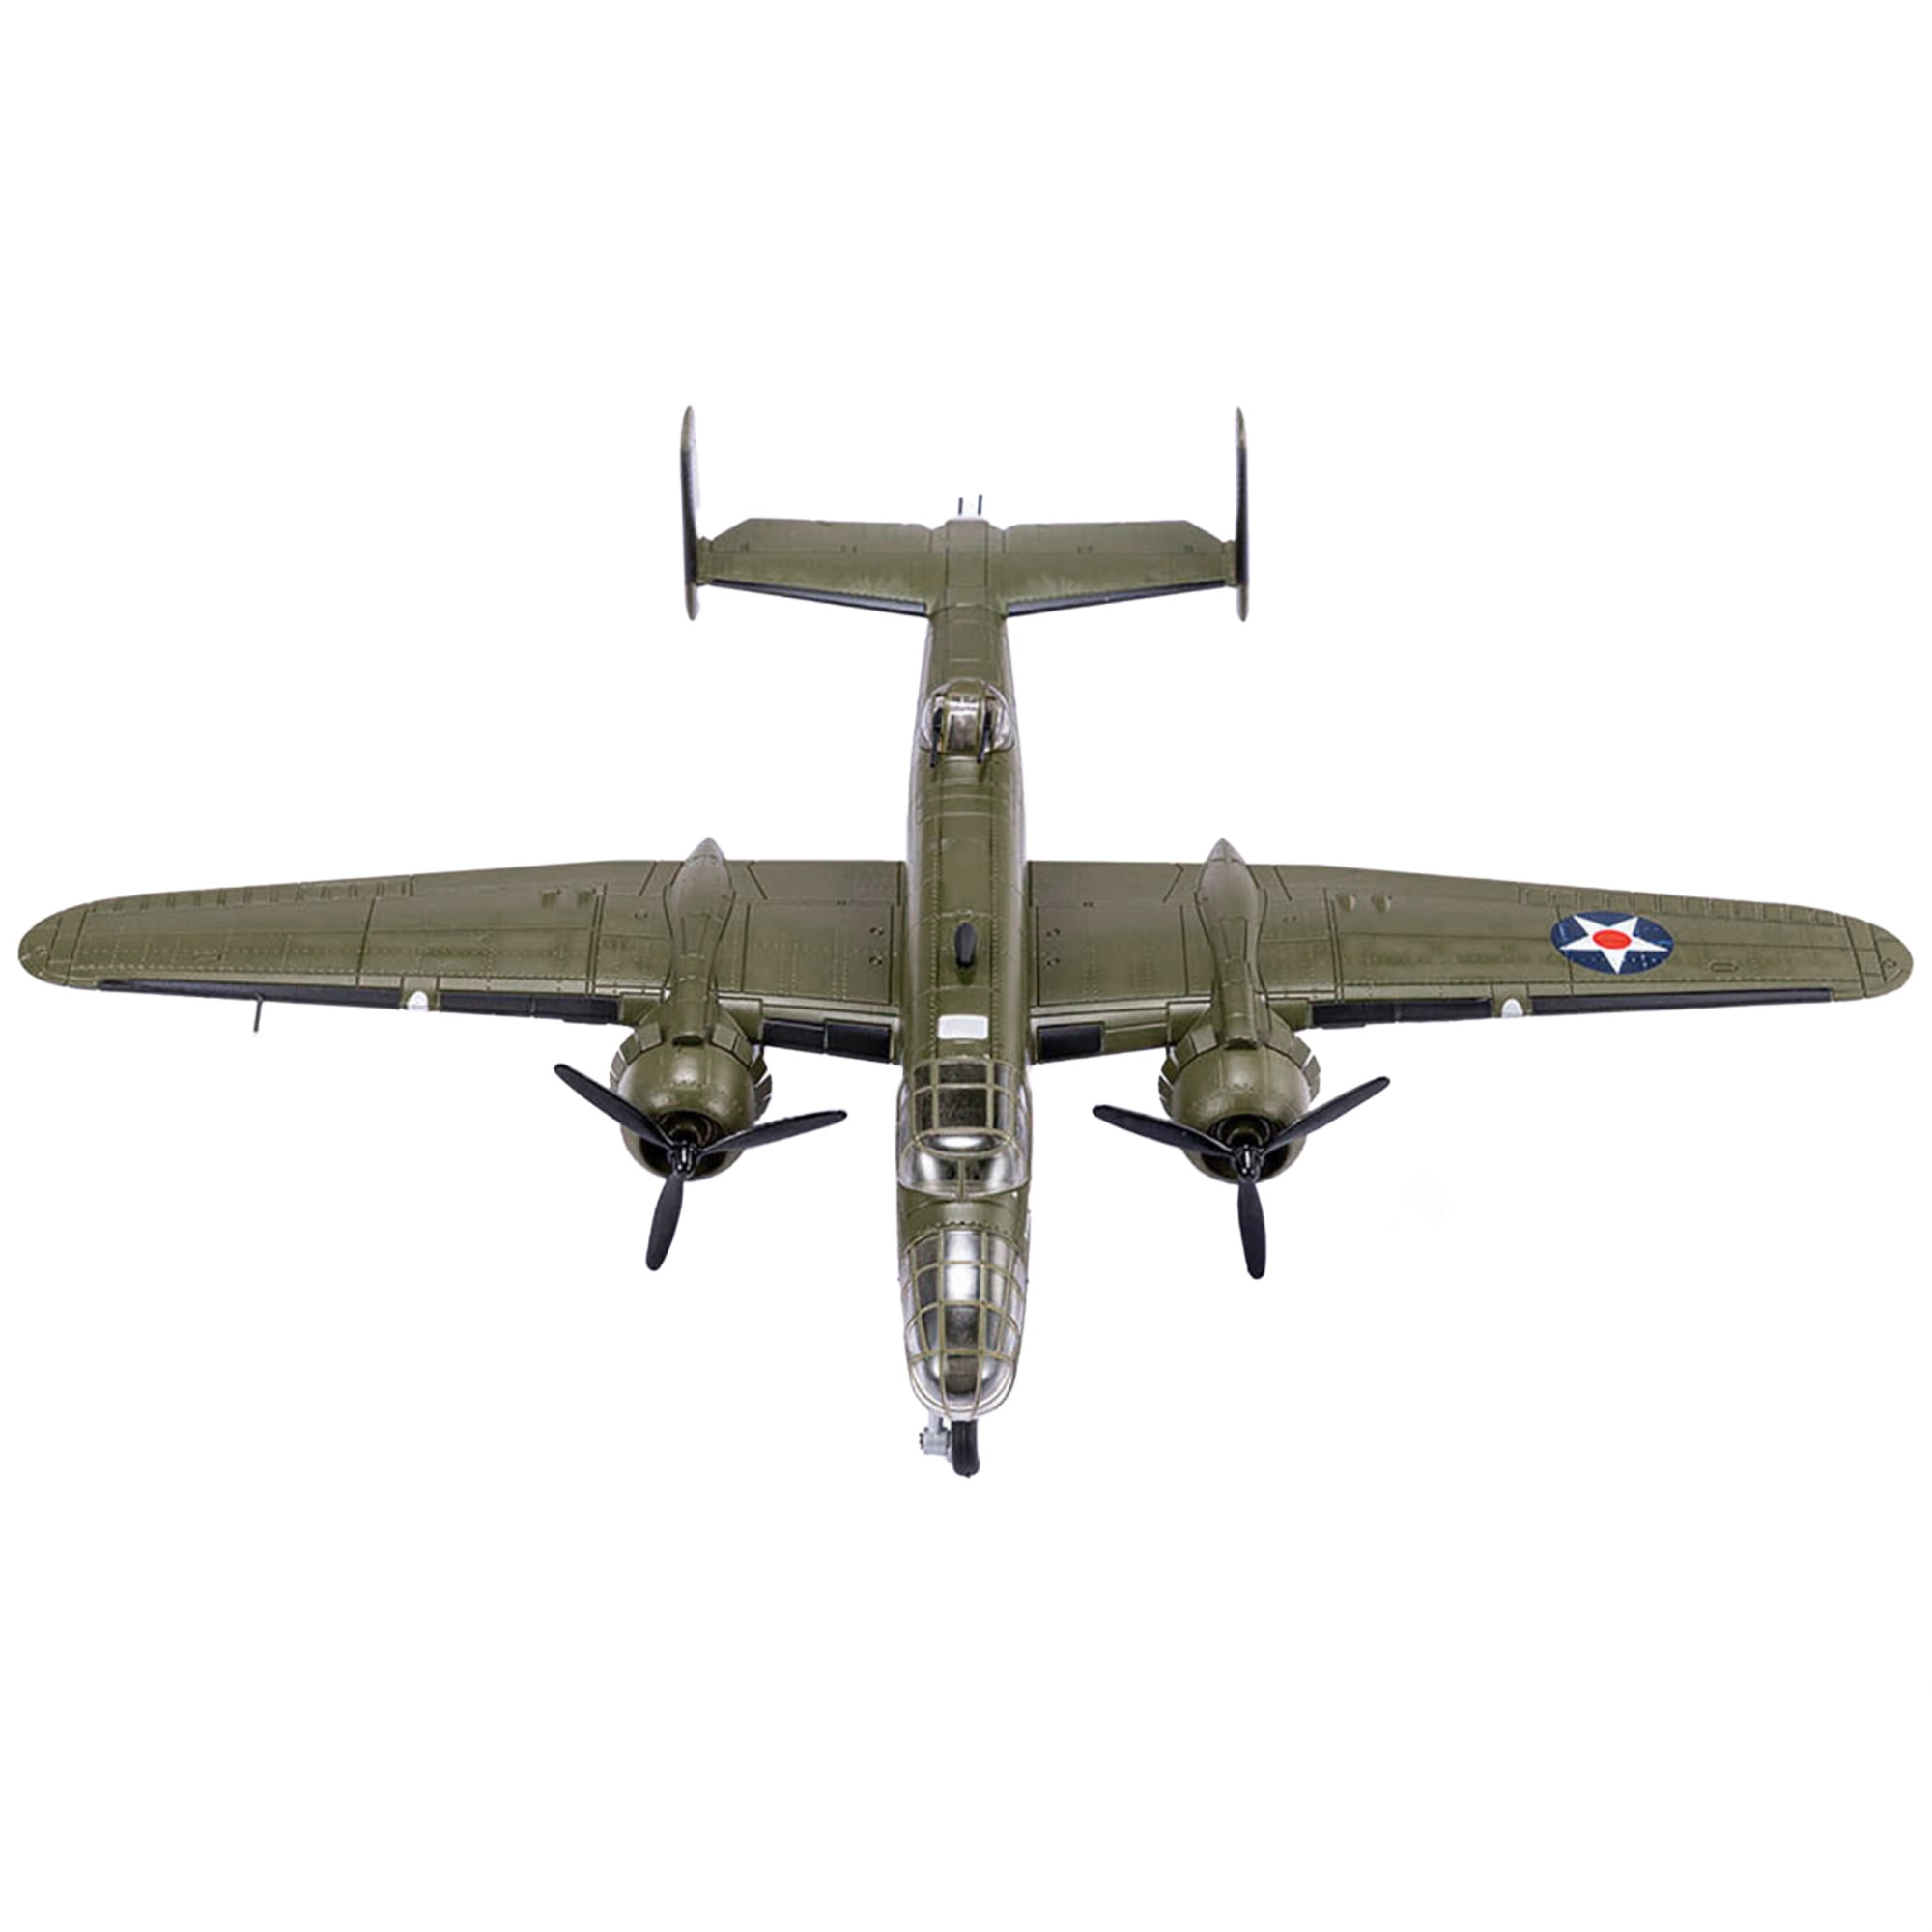 Picture of Air Force 1 AF1-0111B 1-72 Scale North American B-25B Mitchell Bomber Aircraft Whirling Dervish 34 Bomber Squadron 17th Bomber Group United States Air Force Diecast Model Airplane